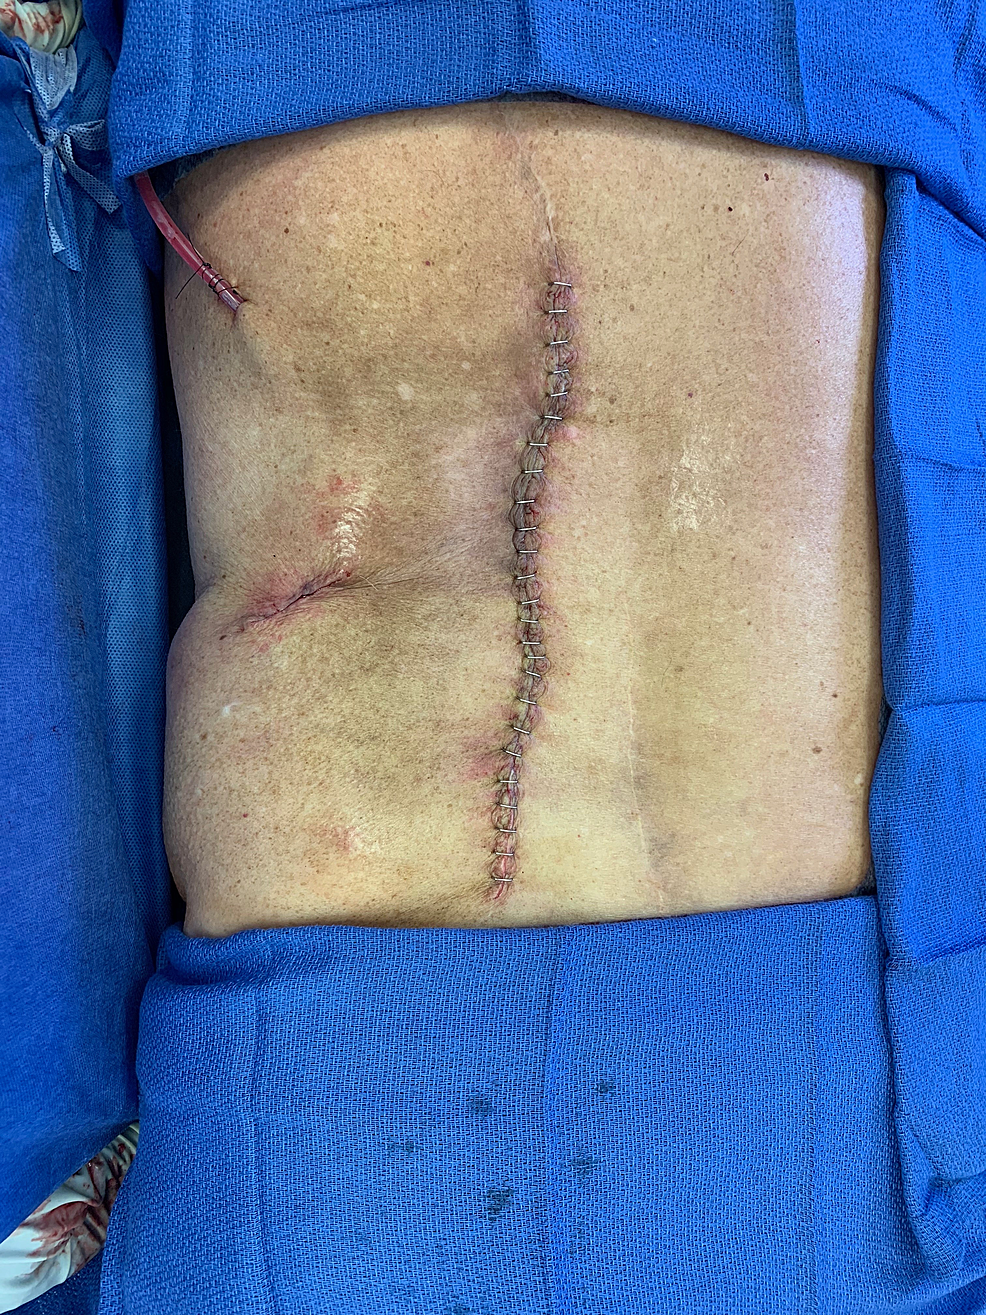 Final-closure-after-the-sinus-track-and-the-necrotic/radiated-tissue-was-excised-and-the-mental-flap-was-draped-into-the-wound.-A-JP-drain-was-placed-into-the-wound-and-the-overlying-skin-flaps-were-brought-together-there-and-closed.-